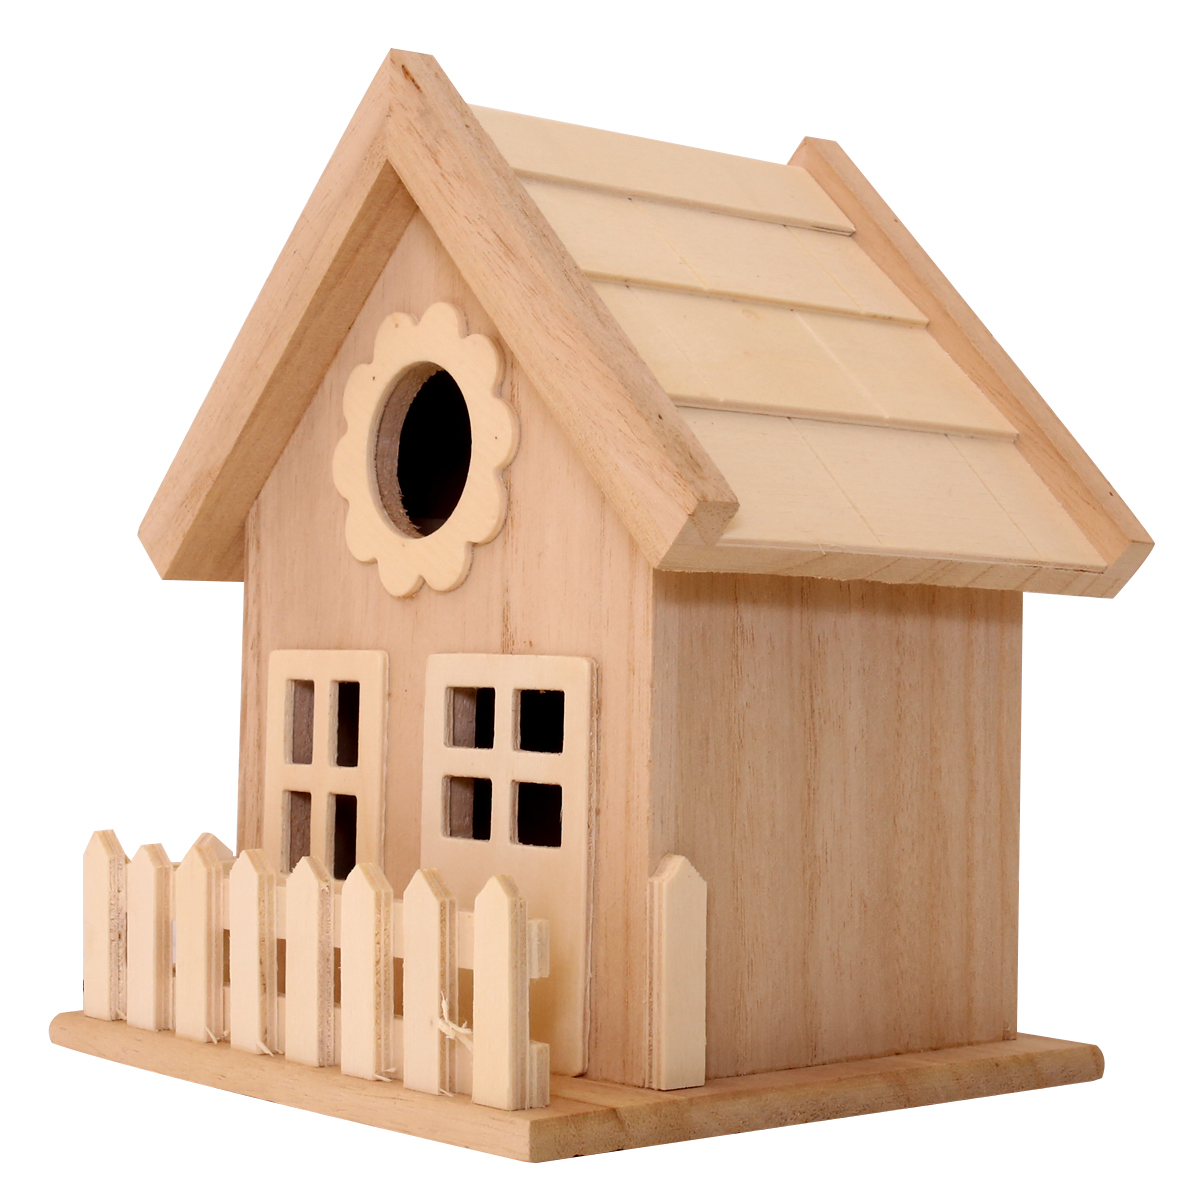 Find the Wood Birdhouse with Fence by ArtMinds® at Michaels